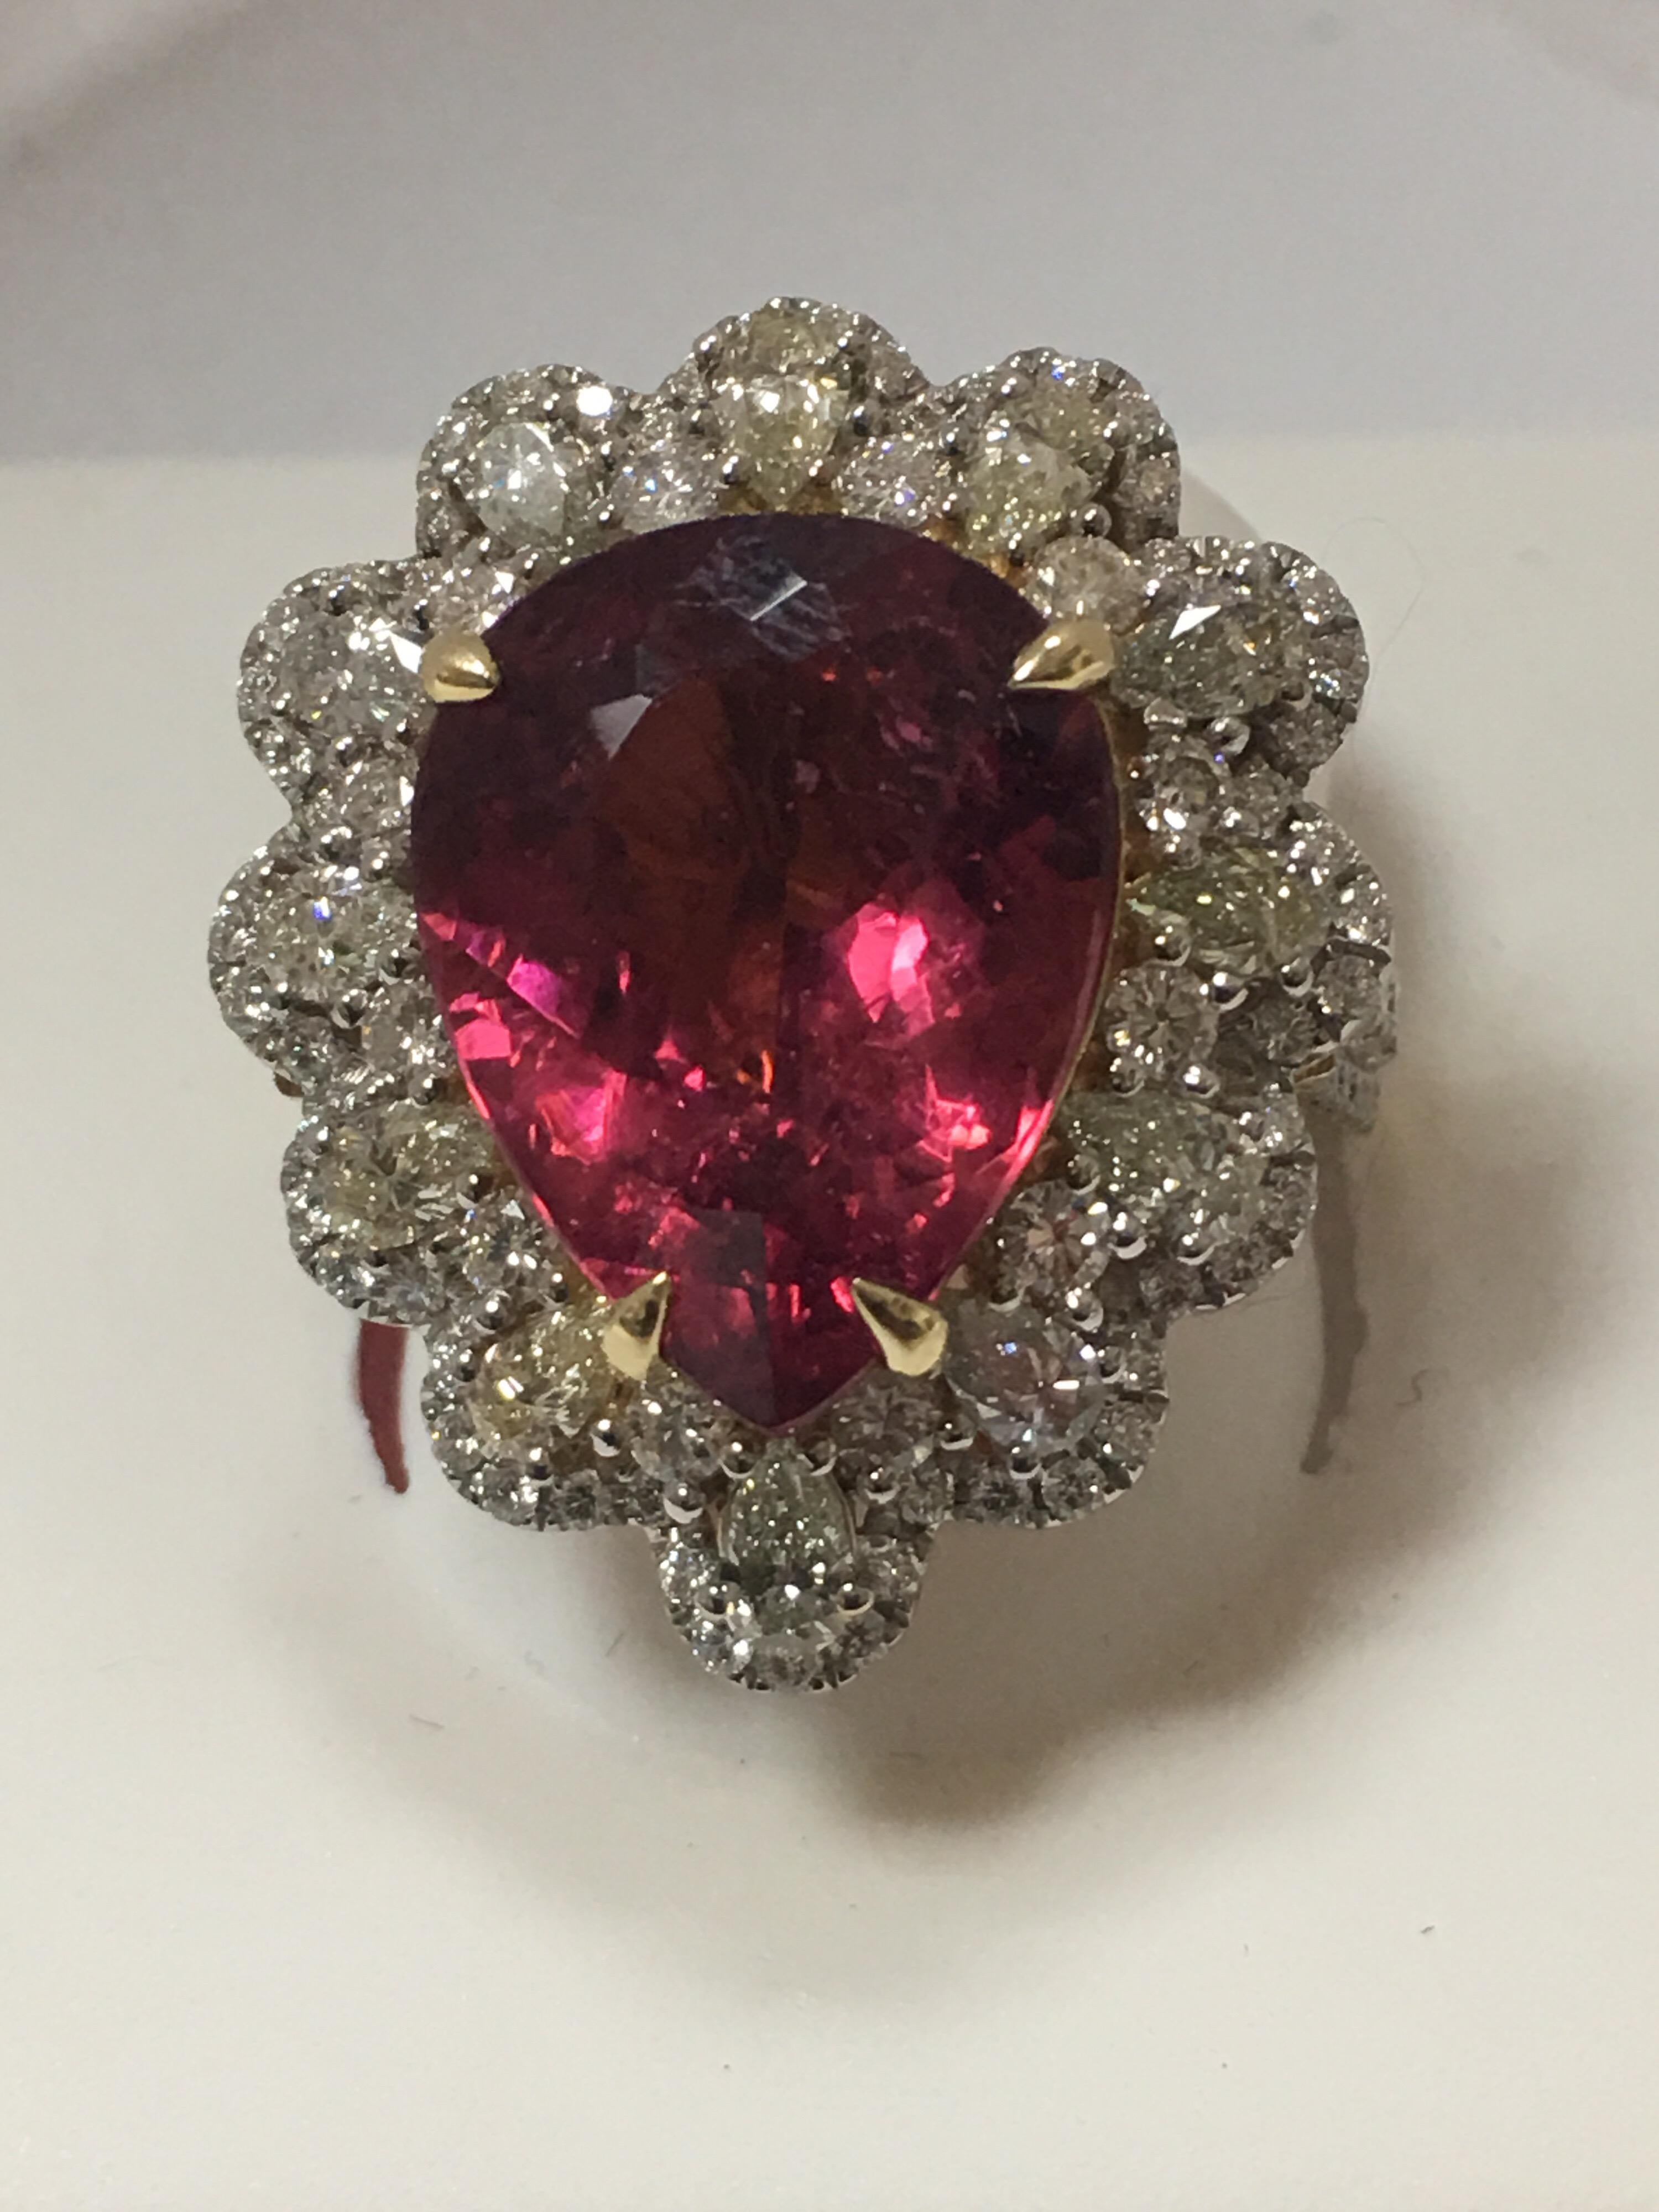 Natural Pink 8.45 Carat Pears shape Tourmaline and 2.16 Carat Diamond Ring Set In 14 Karat Yellow  is one of a kind handcrafted ring. The size of the ring is 7 and can be resized if needed.